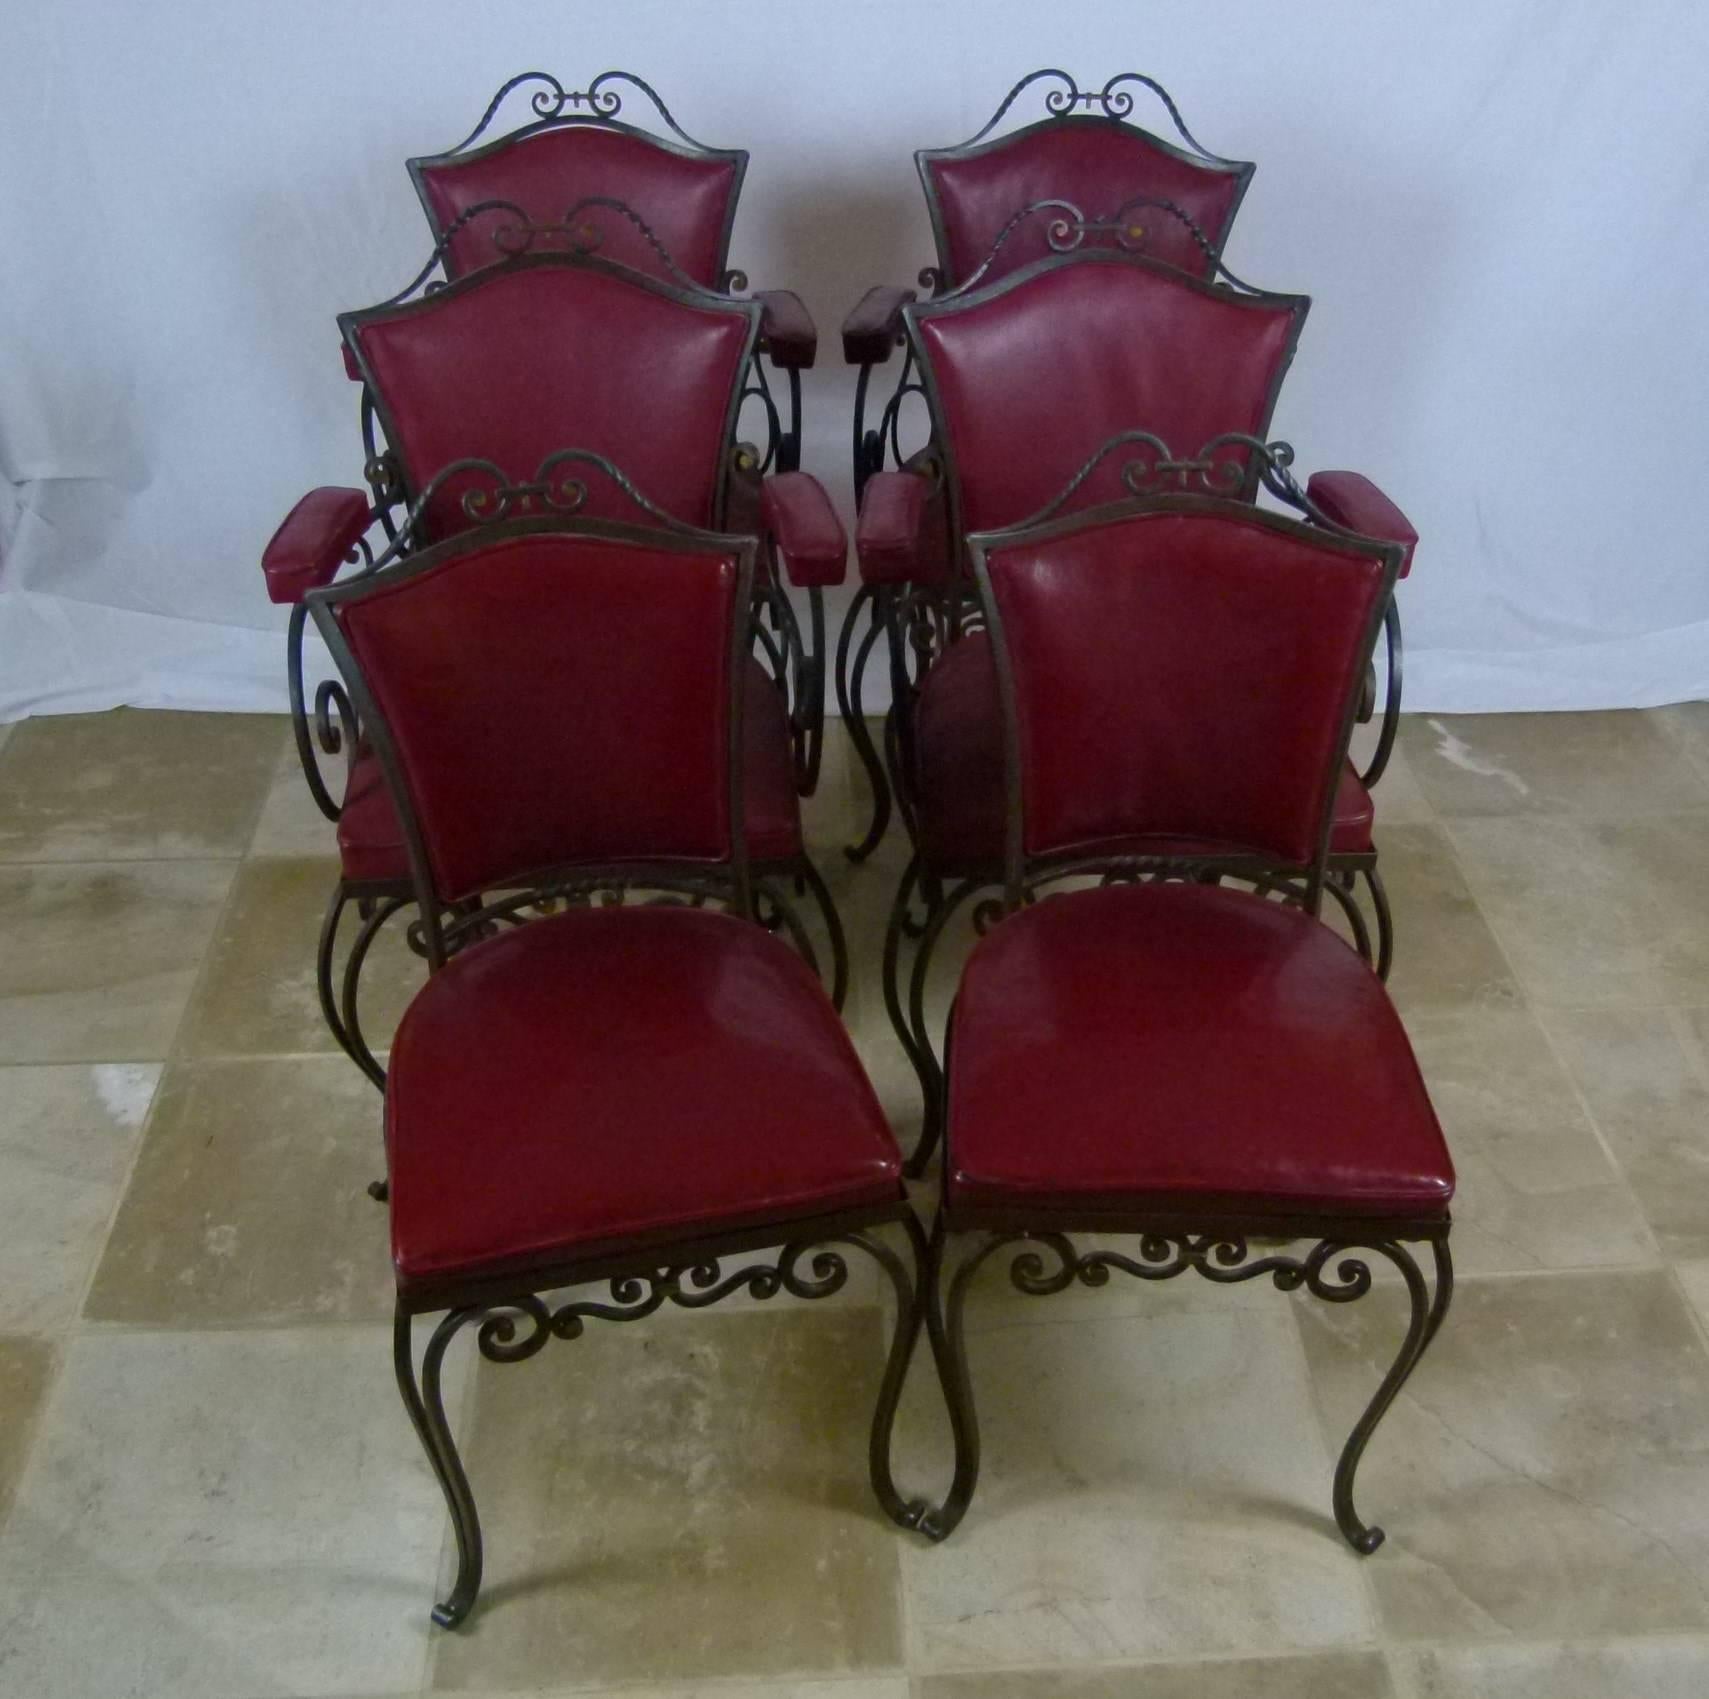 Art Deco Series of Four Armchairs and Two Wrought Iron Chairs by JC Moreaux